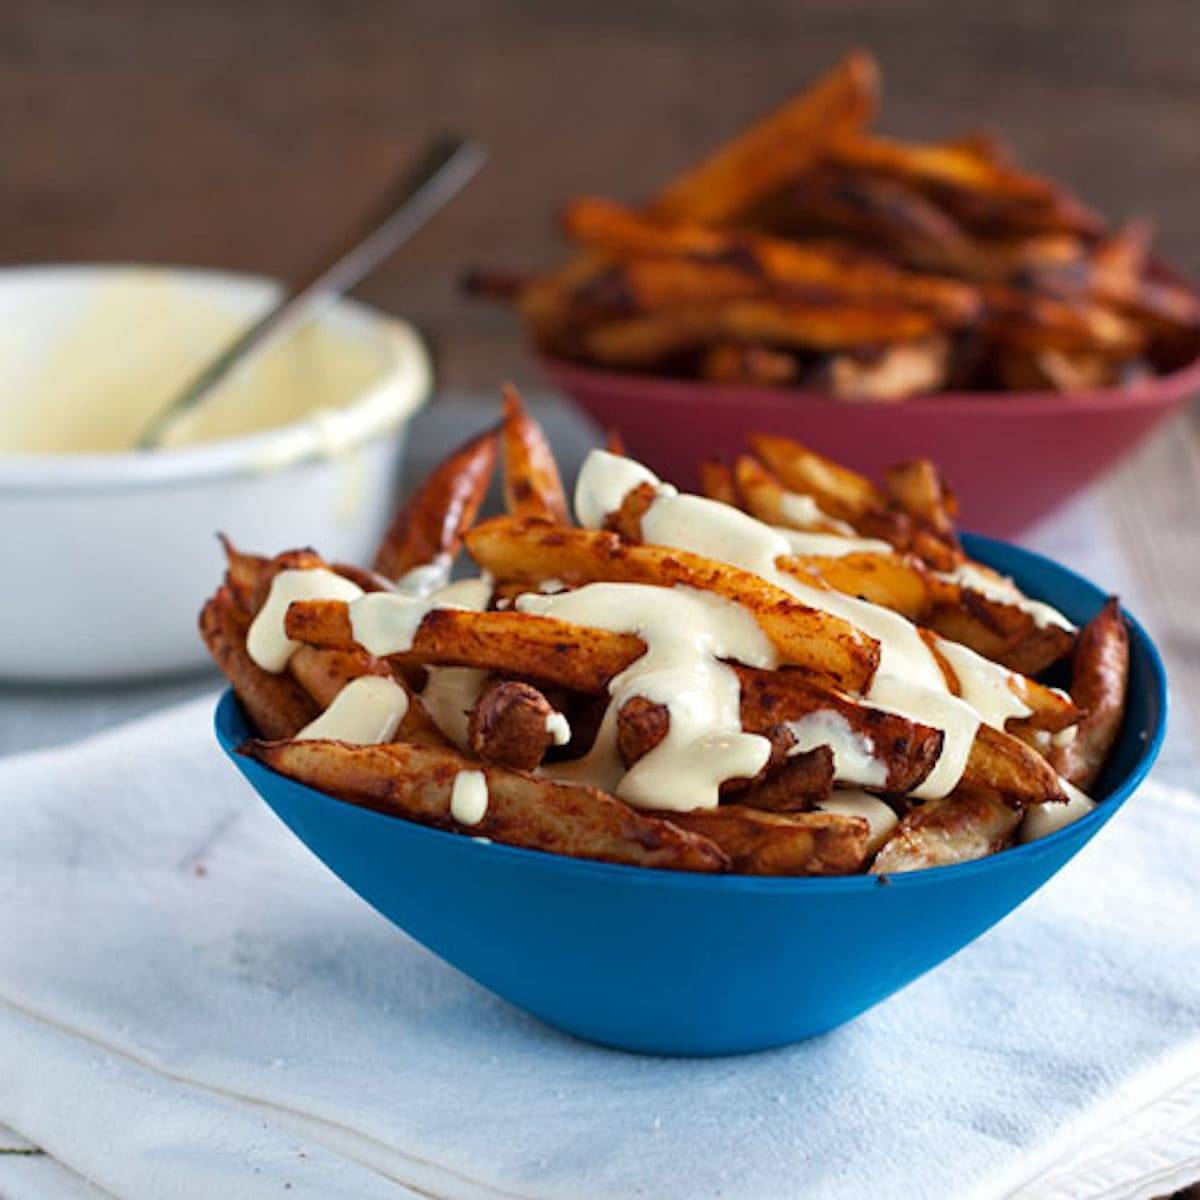 Baked spicy fries topped with a lighter garlic cheese sauce in a blue bowl.